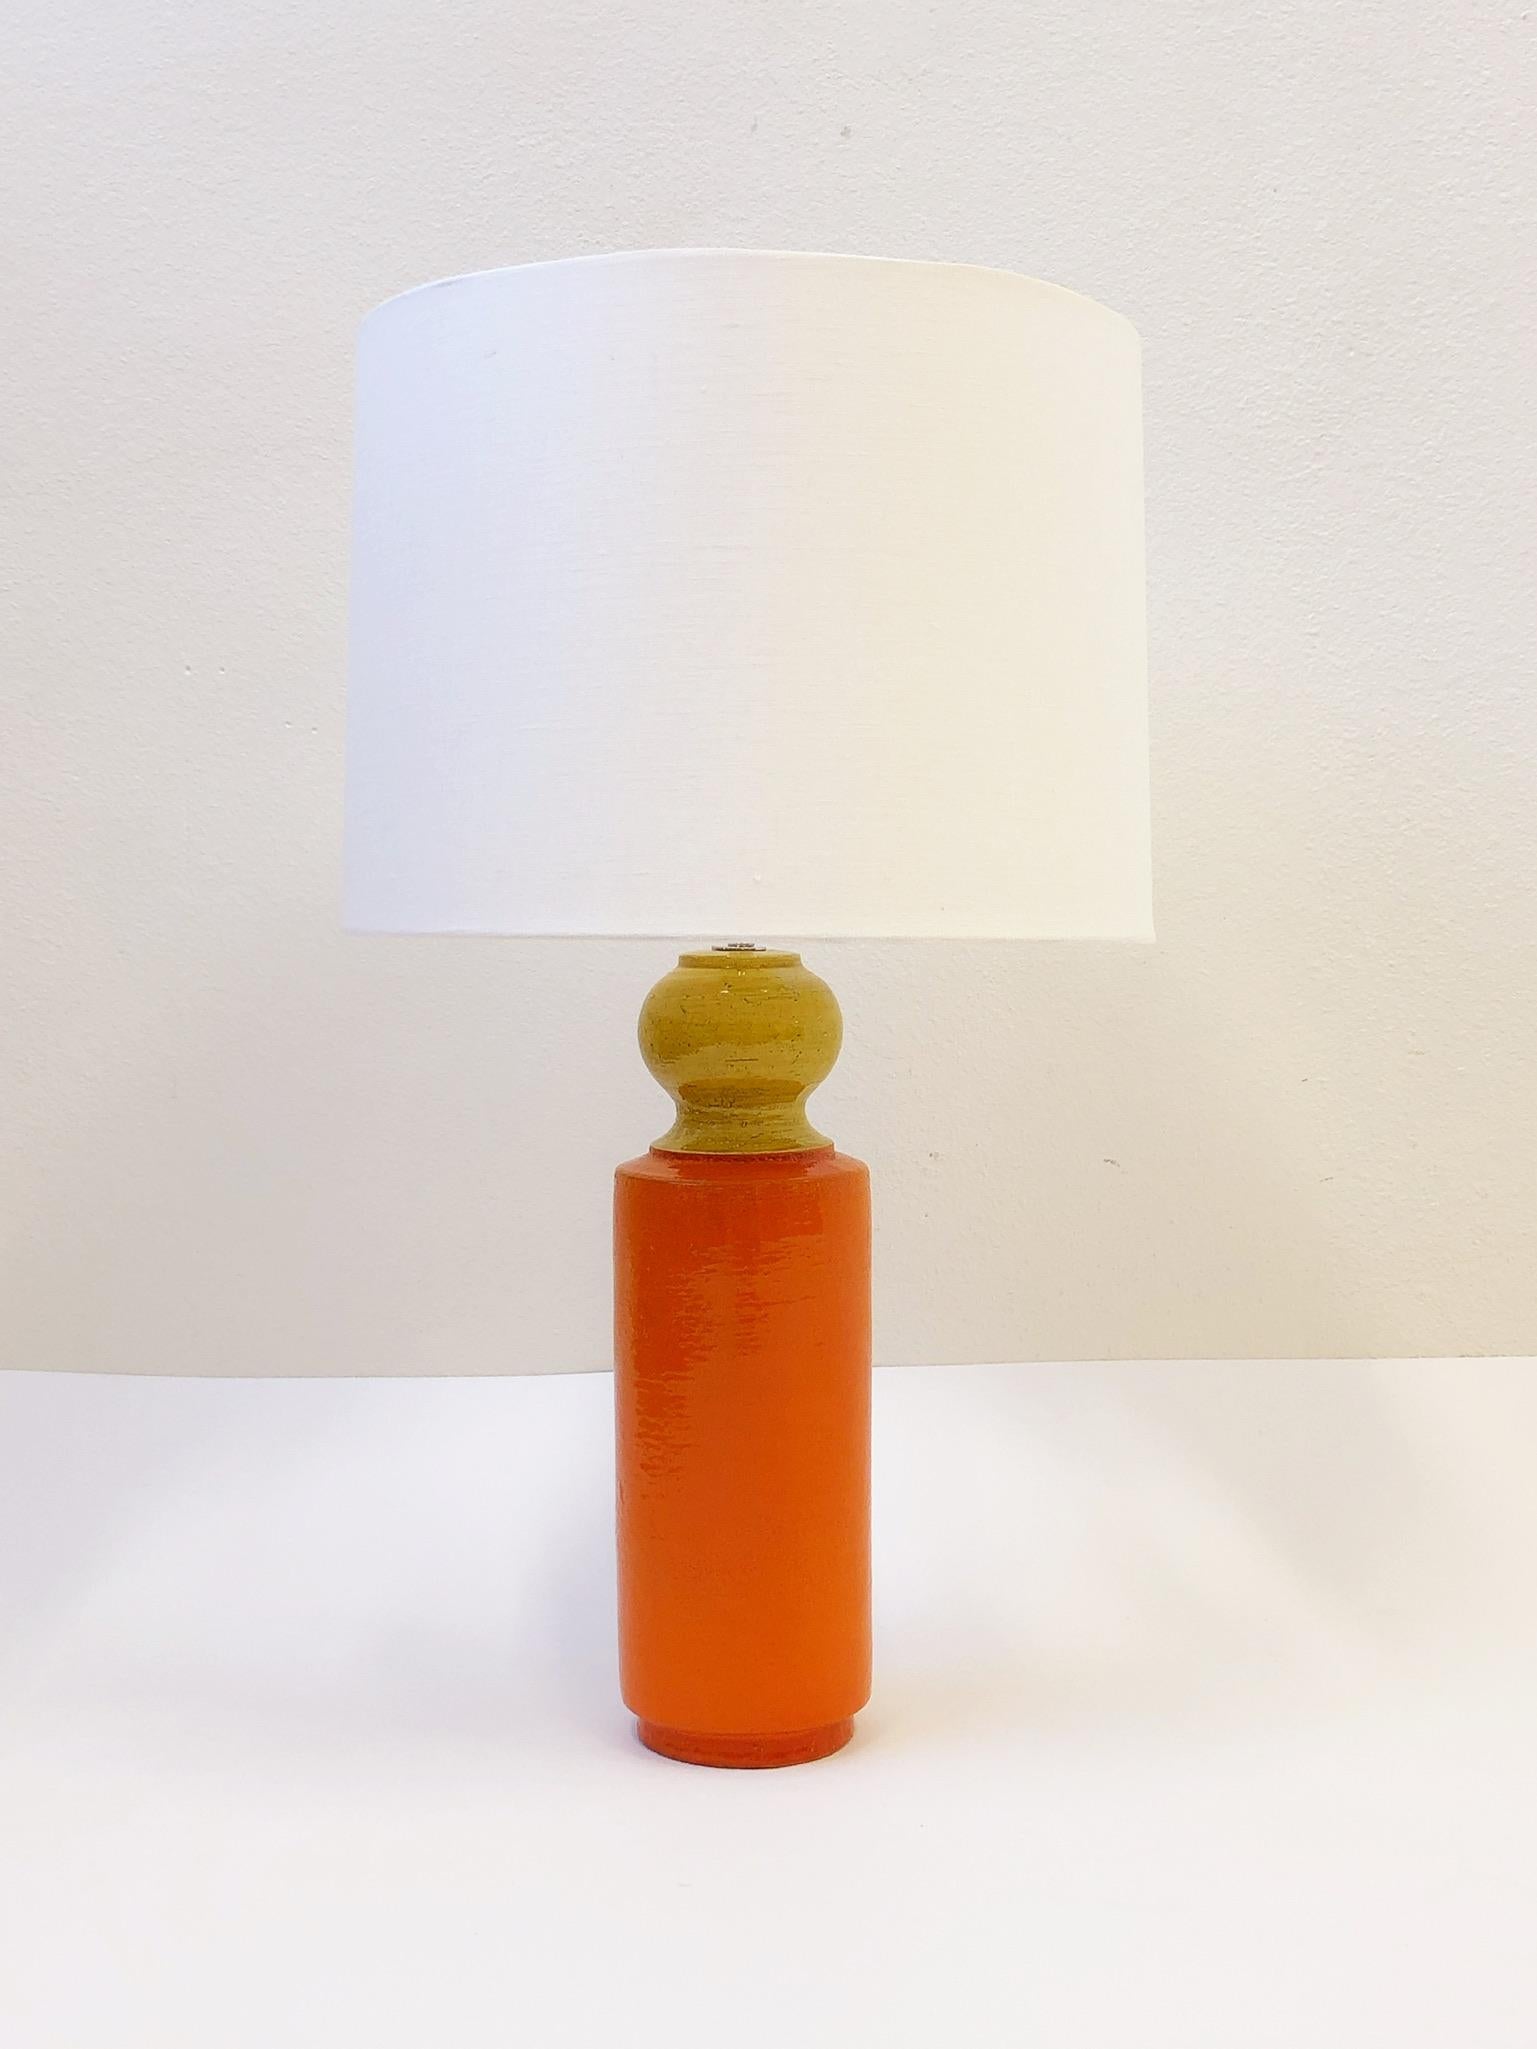 A beautiful 1970s Italian ceramic table lamp by Bitossi. The lamp is orange and mustard yellow glazed, newly rewired with new polish nickel hardware and new vanilla linen shade. 

Dimension: 31” high, 18” diameter.